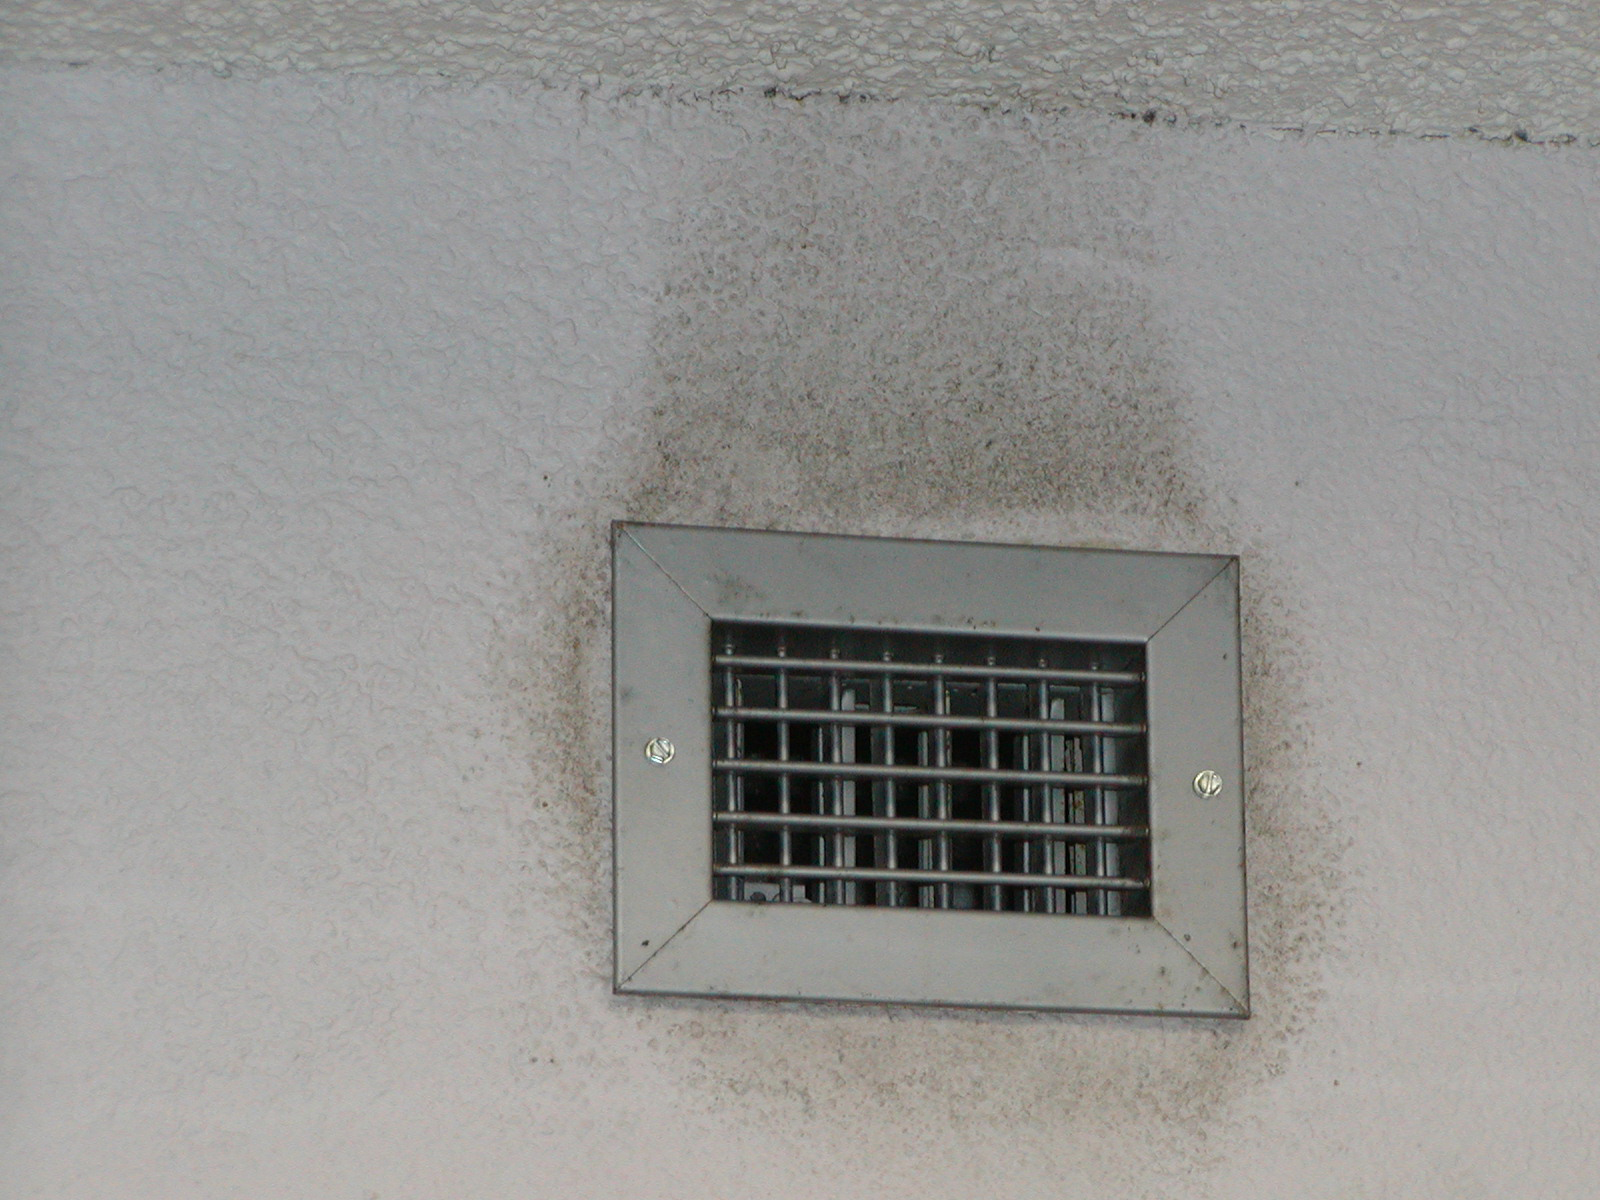 Dusty air vent near spackled ceiling of white room